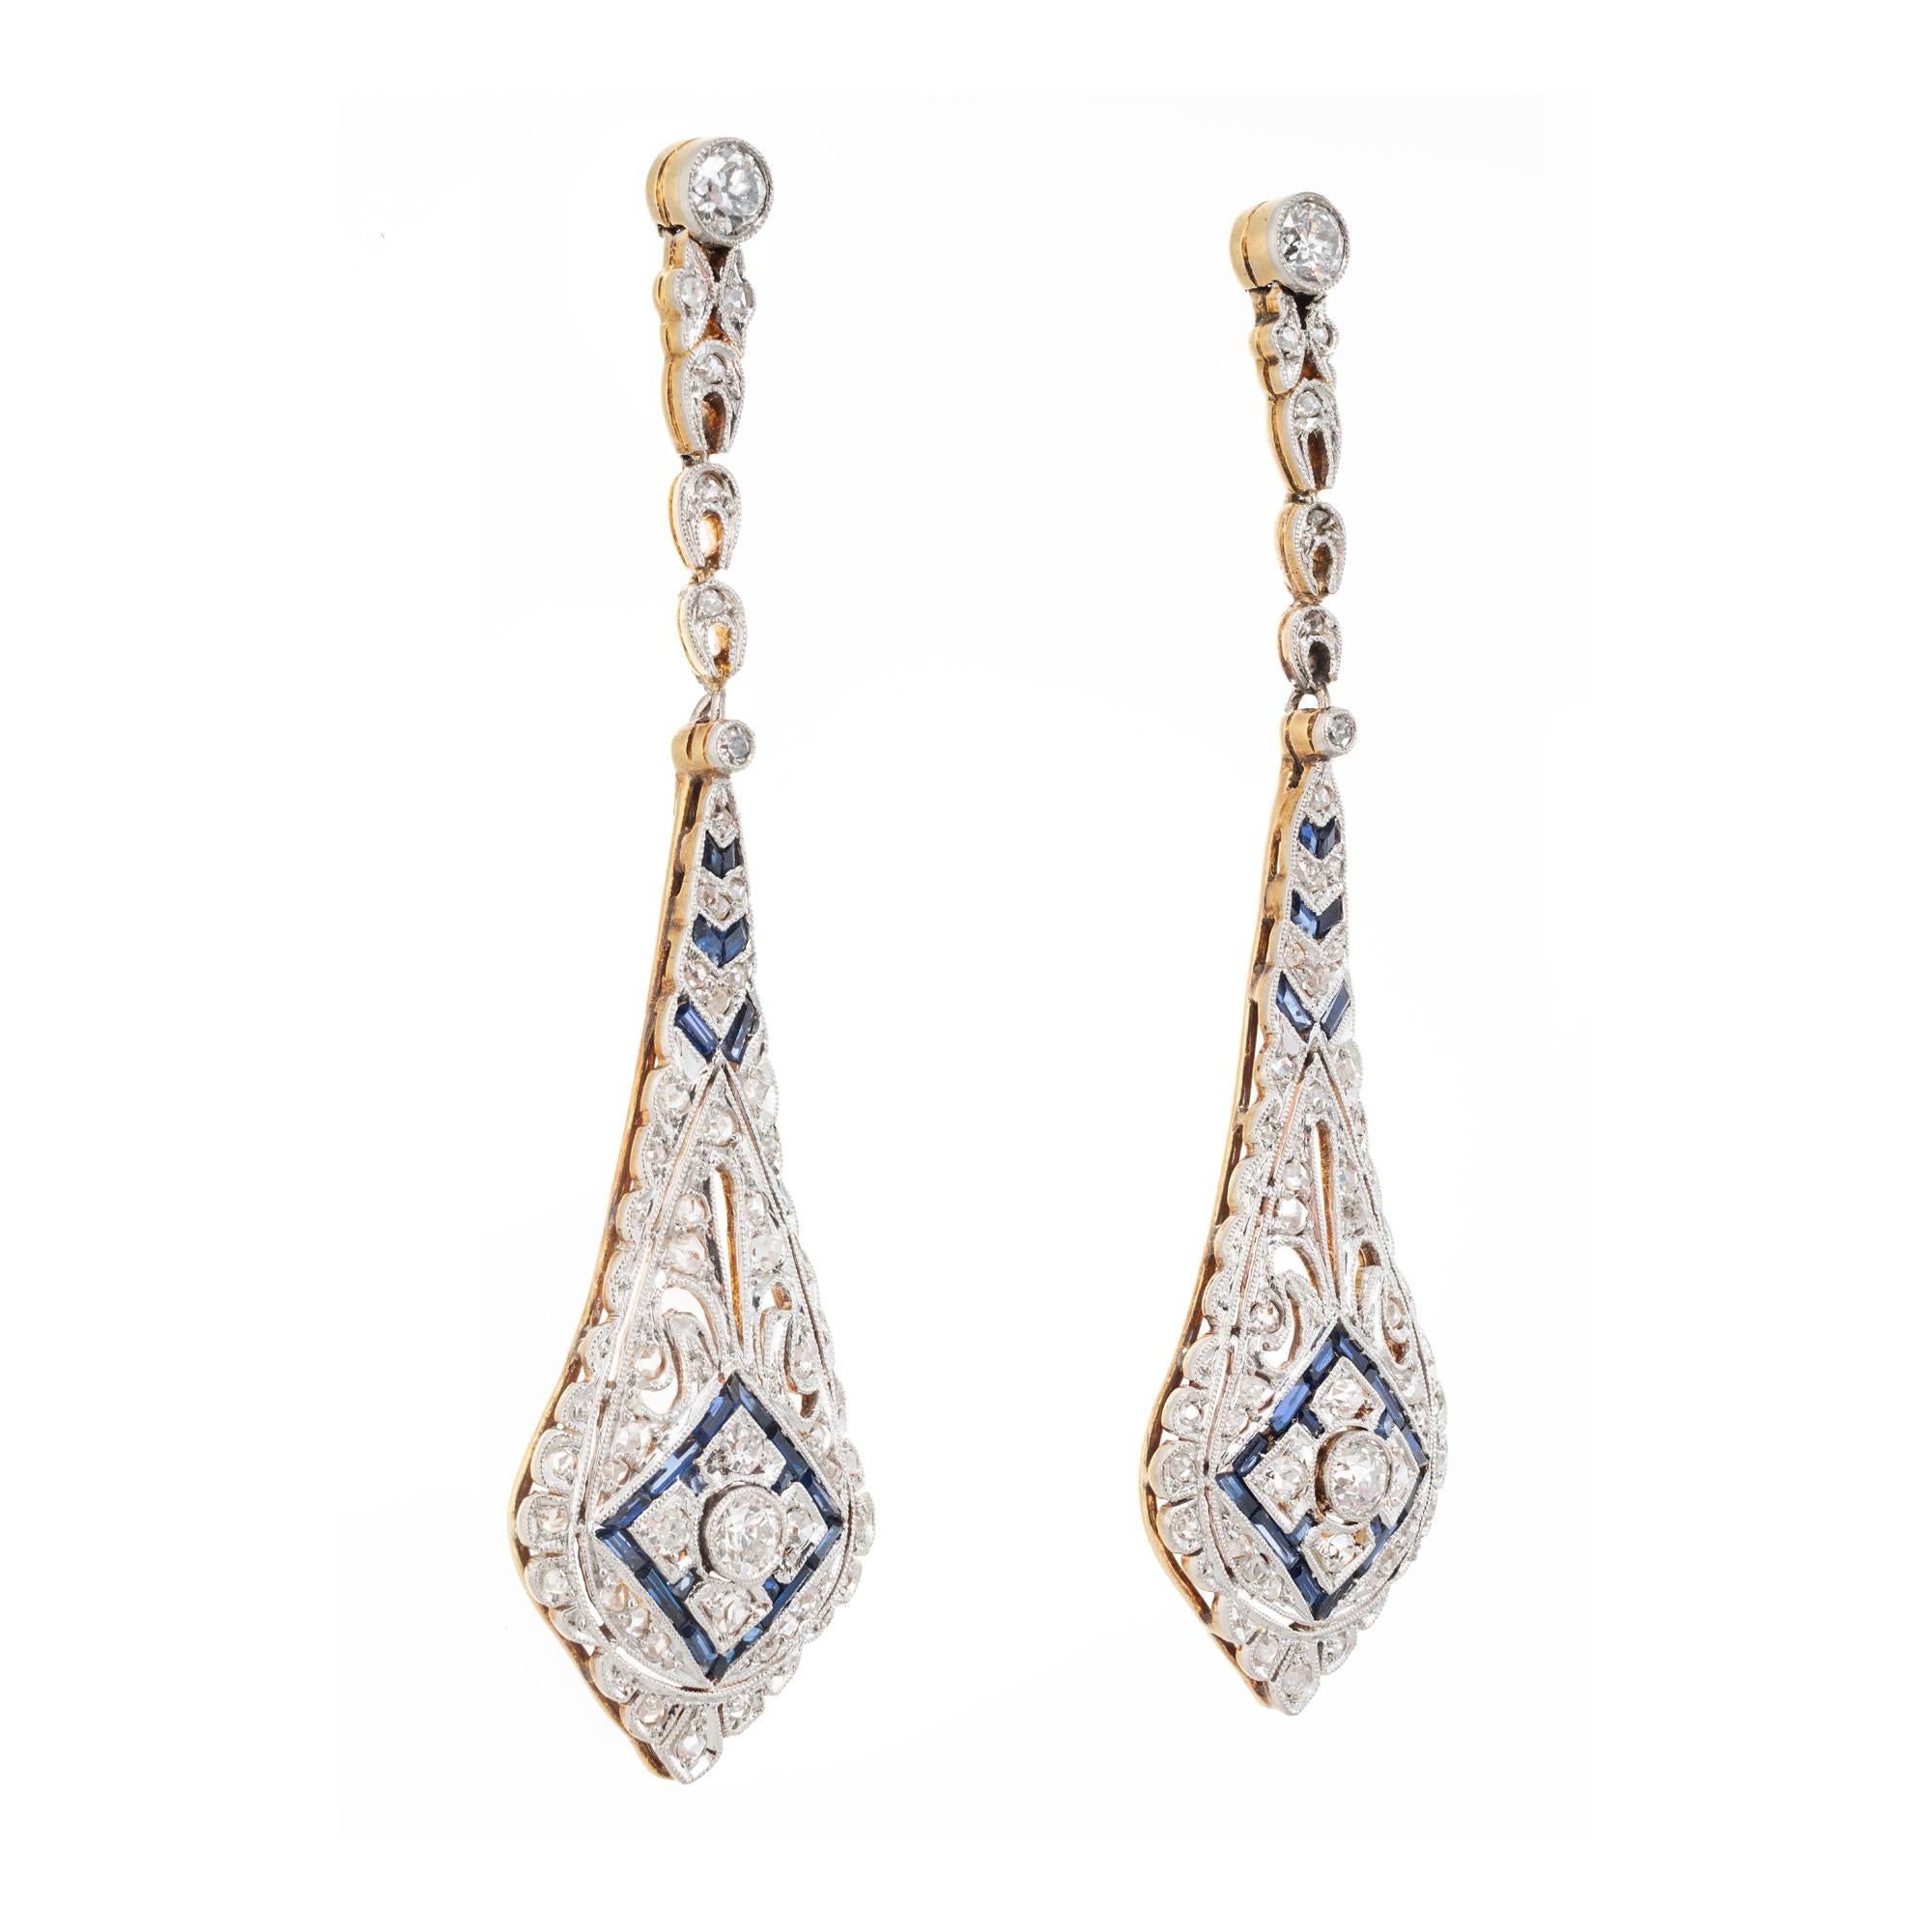 Vintage turn of the century diamond and sapphire dangle drop earrings. These vintage antique earrings were created in the late 1890s early 1900's. Handmade with a cluster of old European, rose cut diamonds and baguette sapphires. The incredible